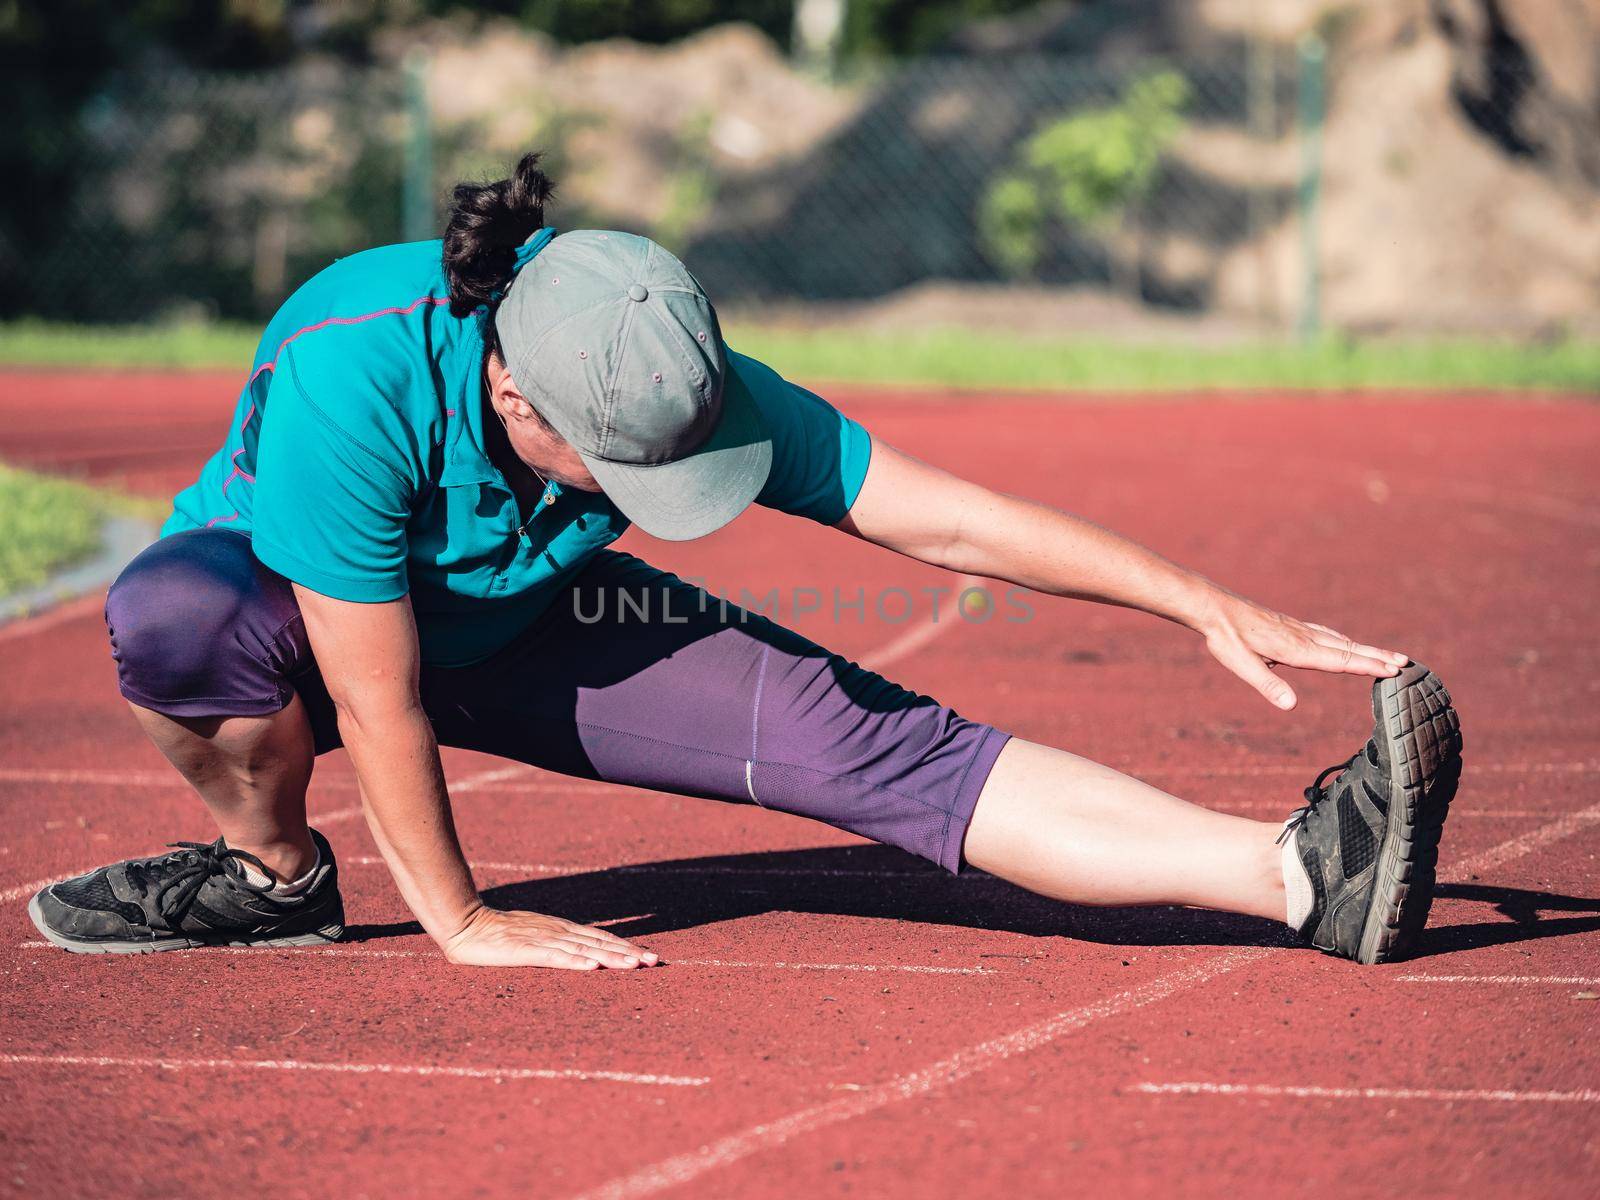 Athletic middle aged woman stretching on red  running track by rdonar2